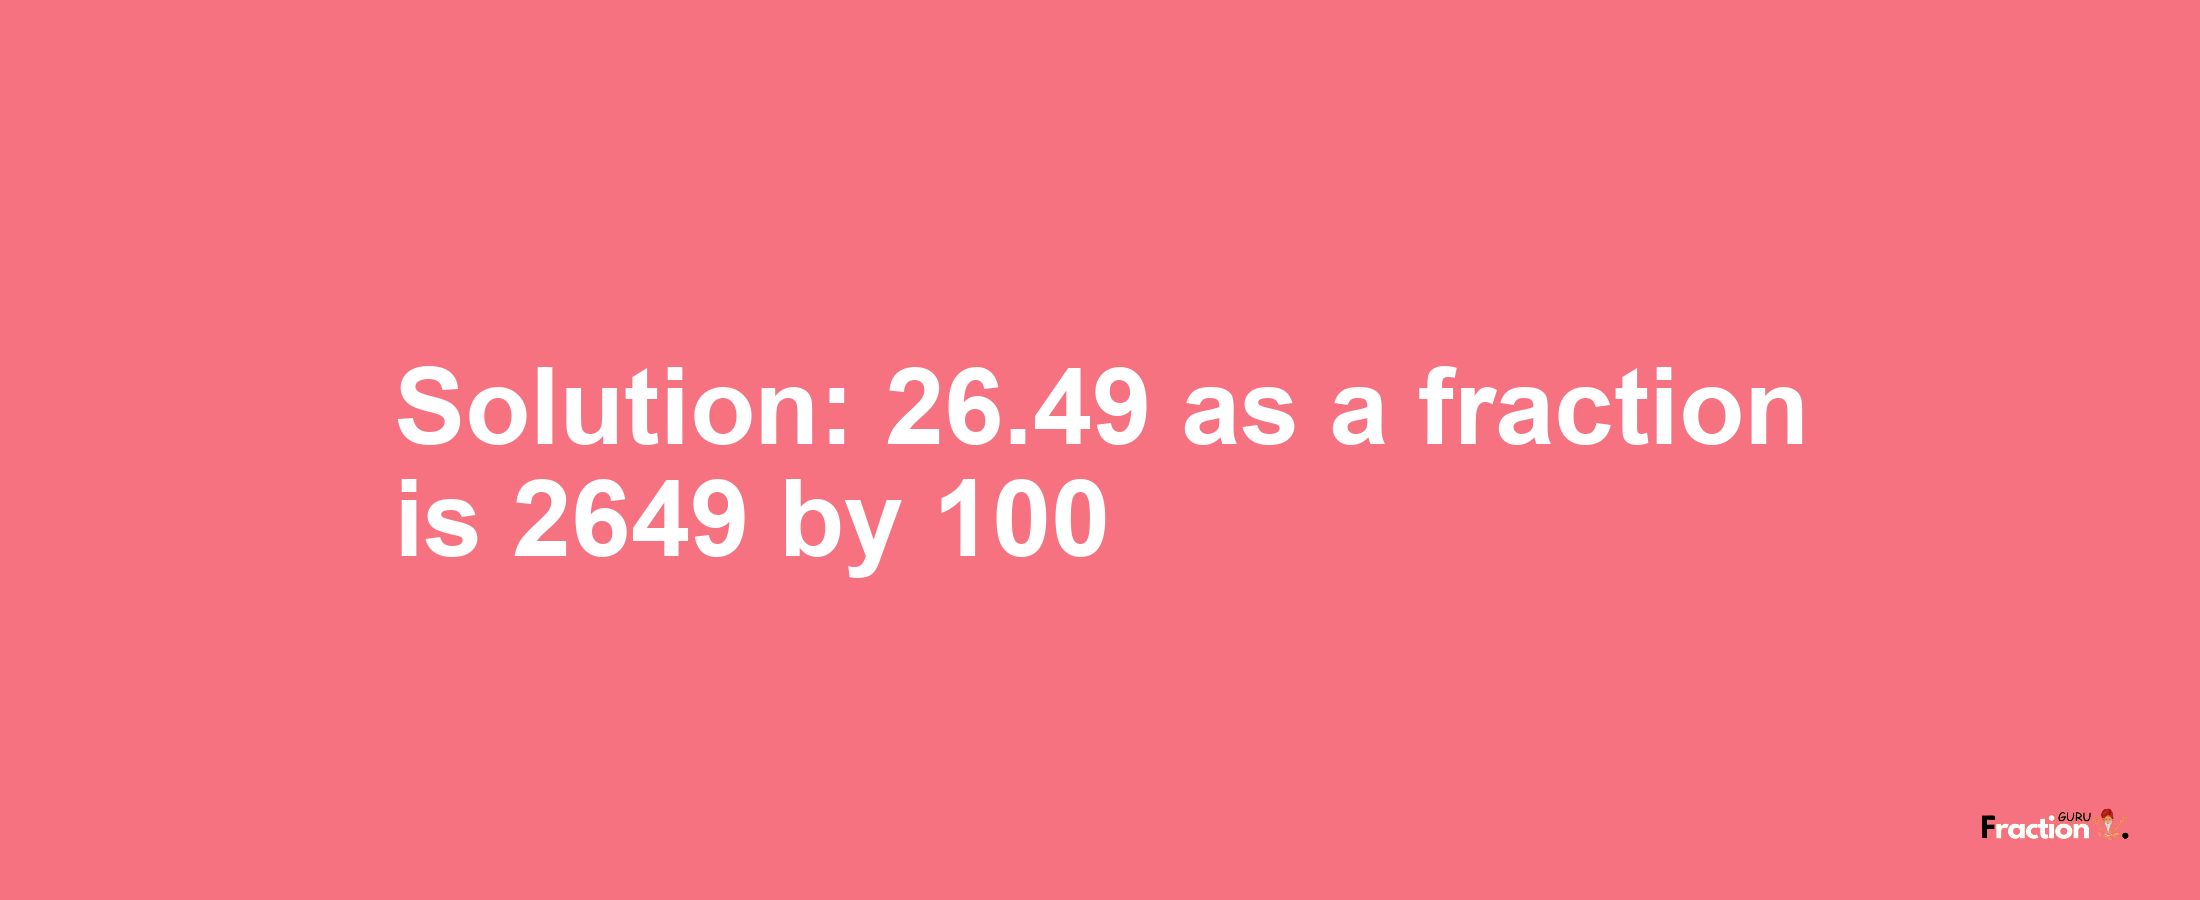 Solution:26.49 as a fraction is 2649/100